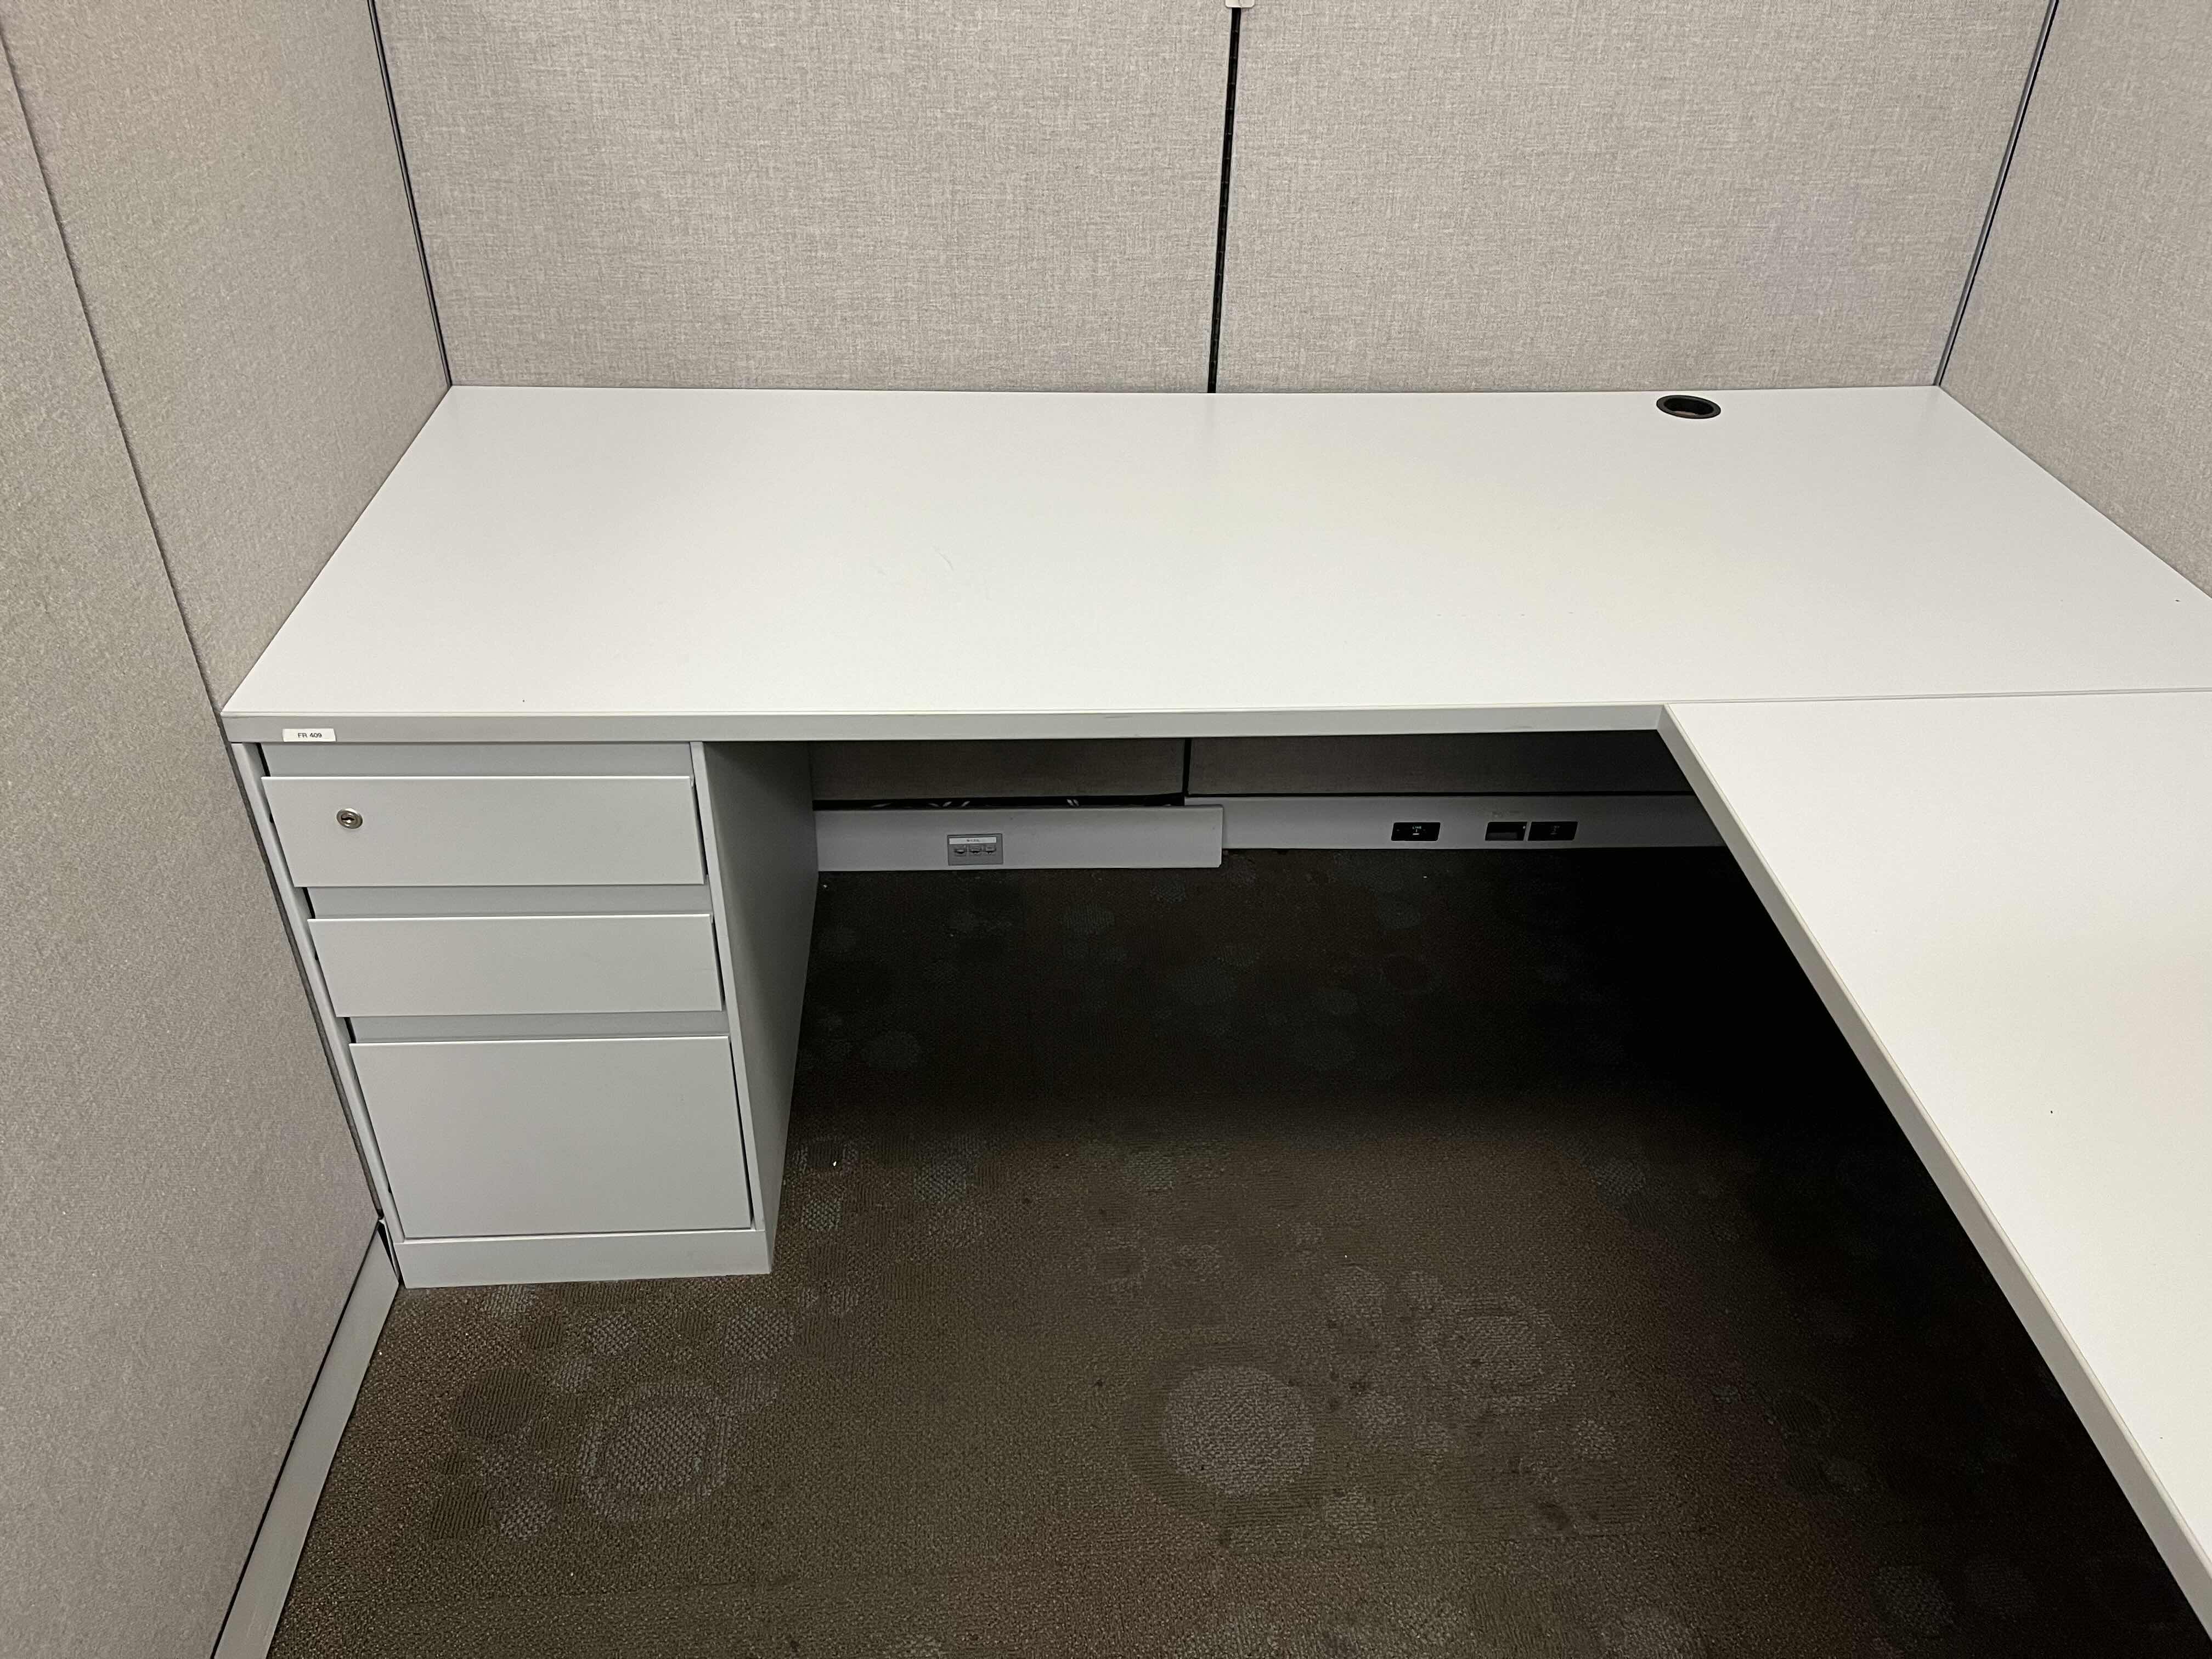 Photo 3 of STEELCASE BUILT IN CUBICLE L SHAPE 3 DRAWER OFFICE DESK 72” X 72” H27.5” W 4 CUBICLE PANELS 30.5”-42” X 54”